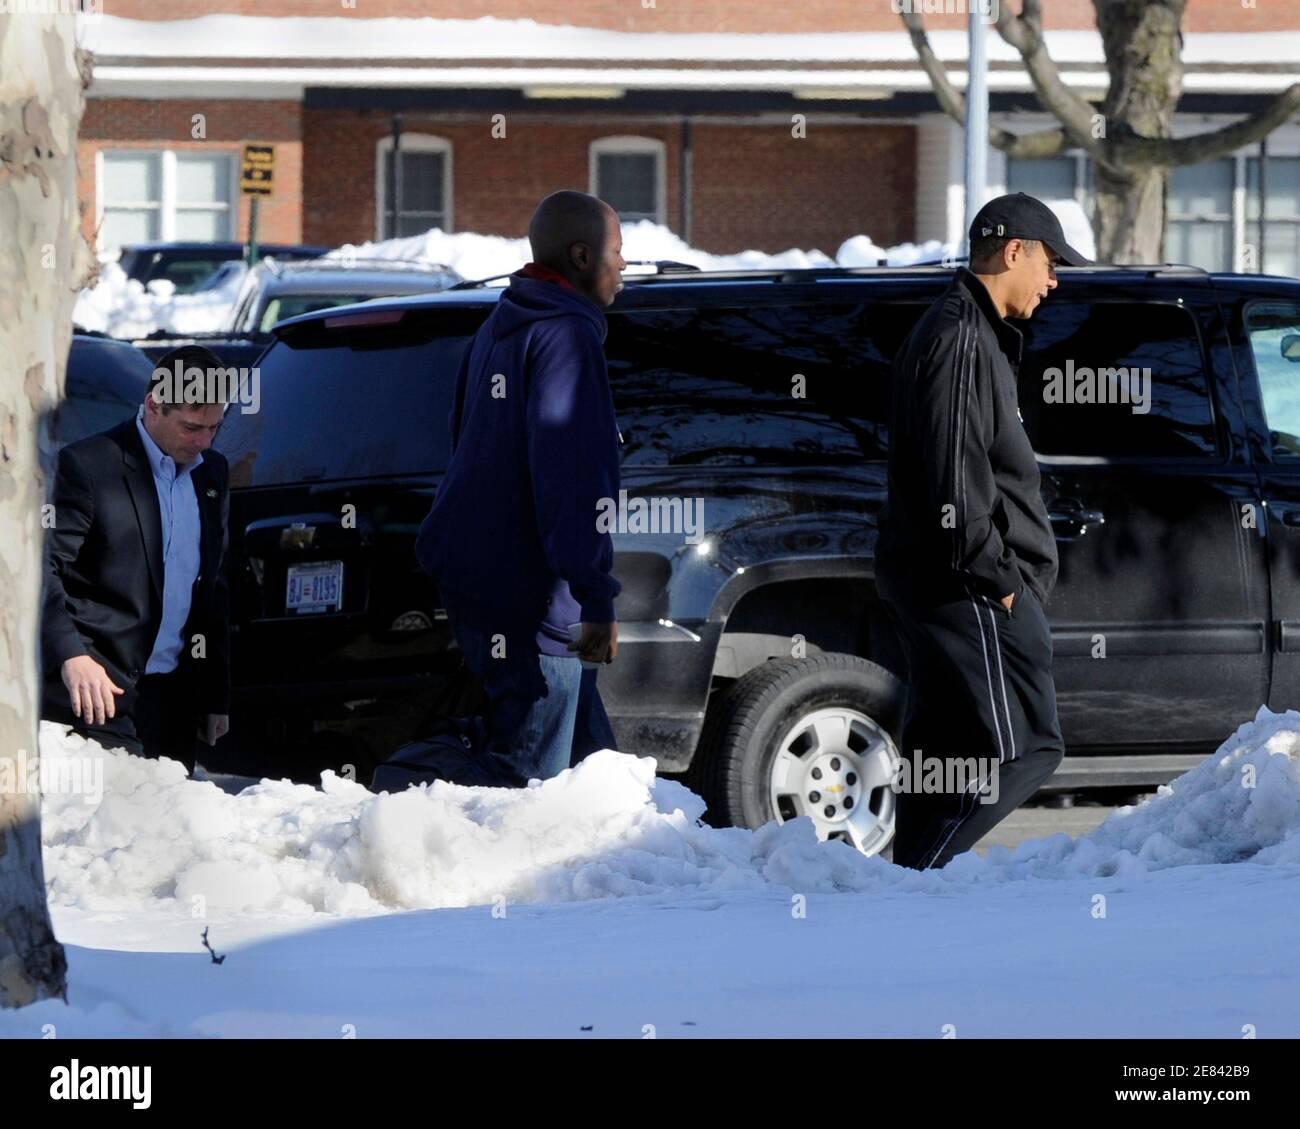 U.S. President Barack Obama (R), dressed in a track suit, walks in front of presidential aide Reggie Love as they arrive at the Physical Fitness Center to play basketball at Ft. McNair in Washington, DC, February 14, 2010.  REUTERS/Mike Theiler (UNITED STATES - Tags: POLITICS SPORT BASKETBALL) Stock Photo